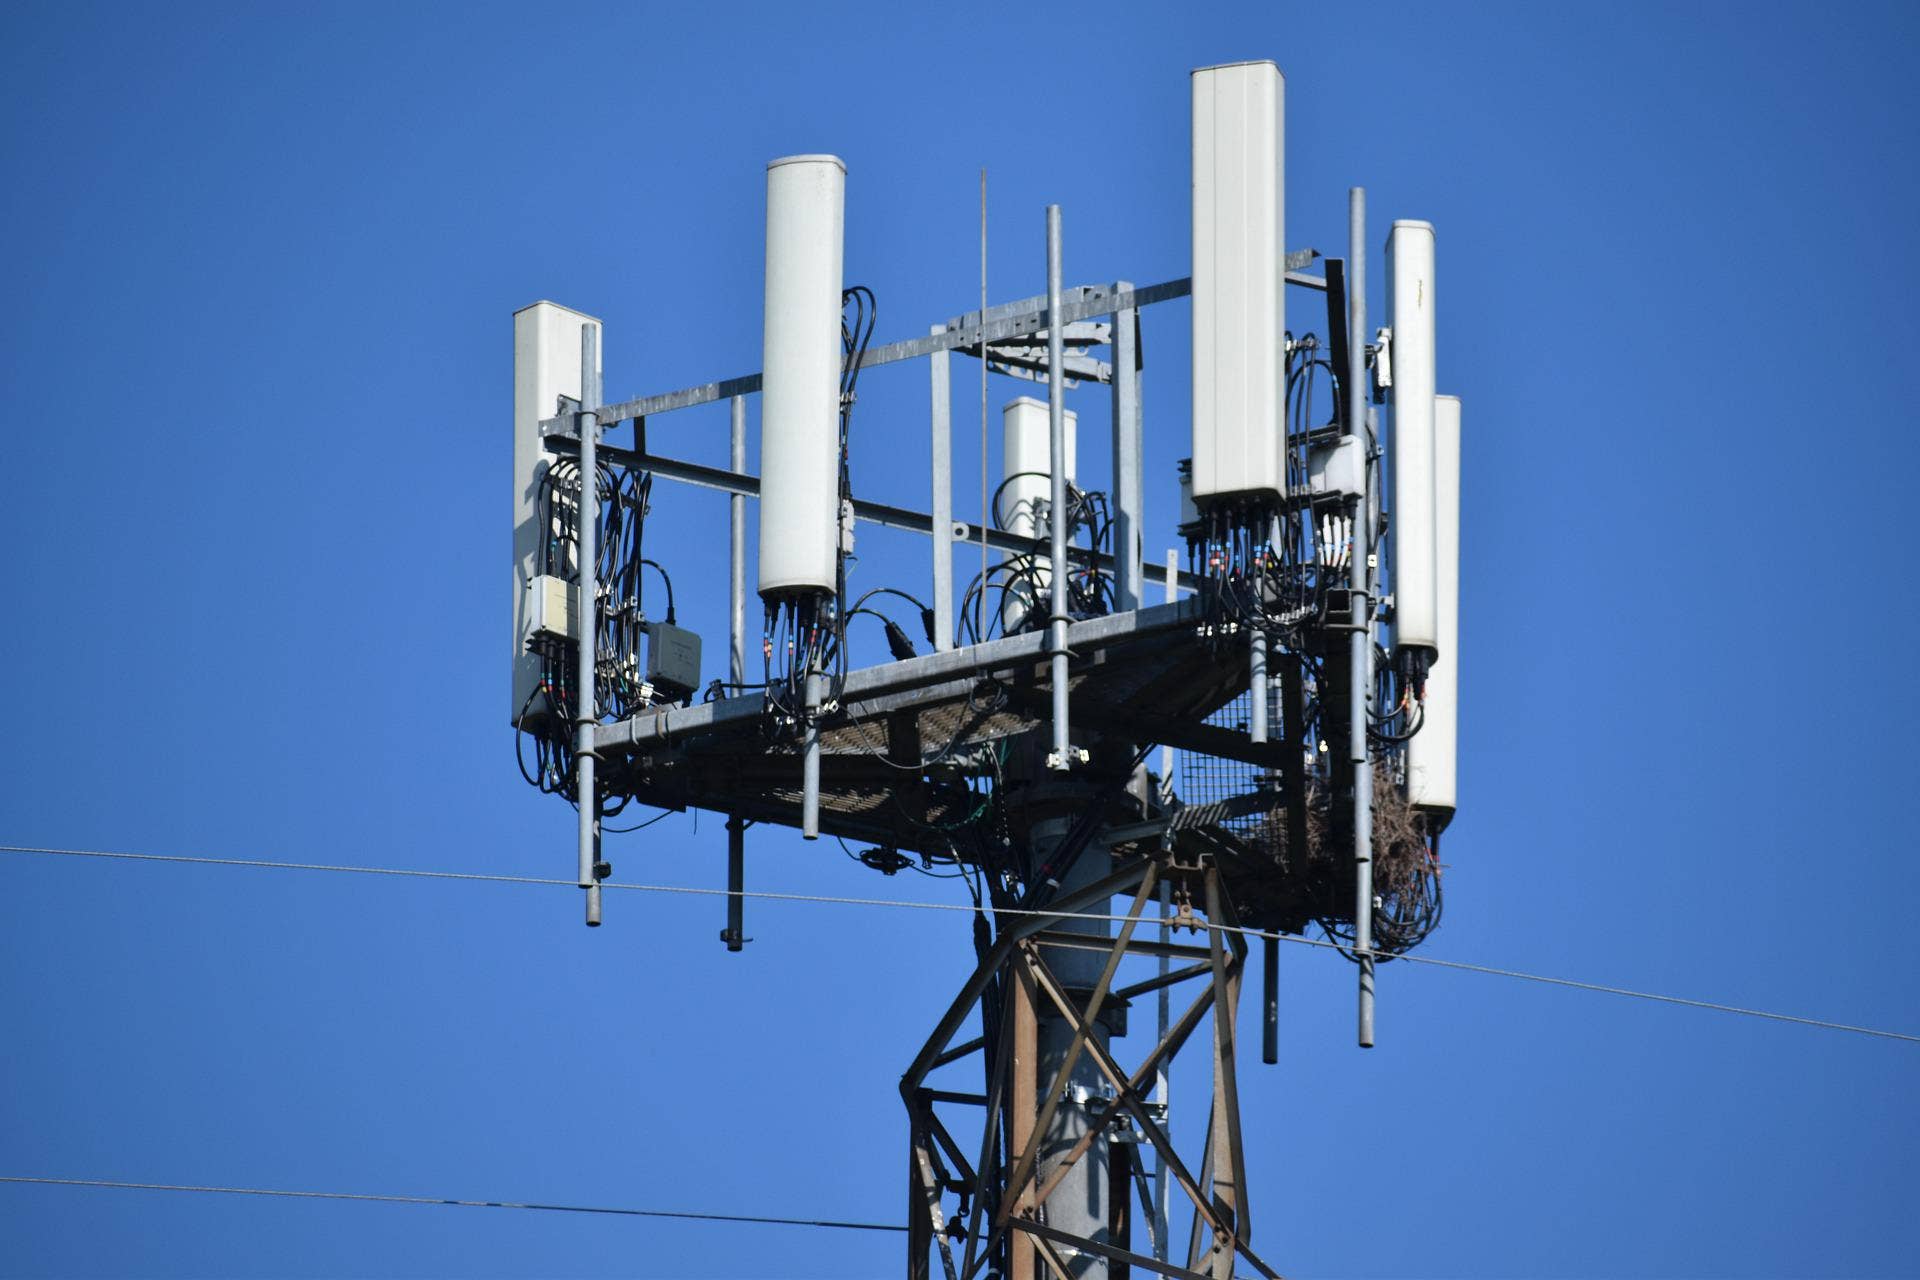 Stay Connected With These 2 Cell Tower REITs Offering Steady Dividends